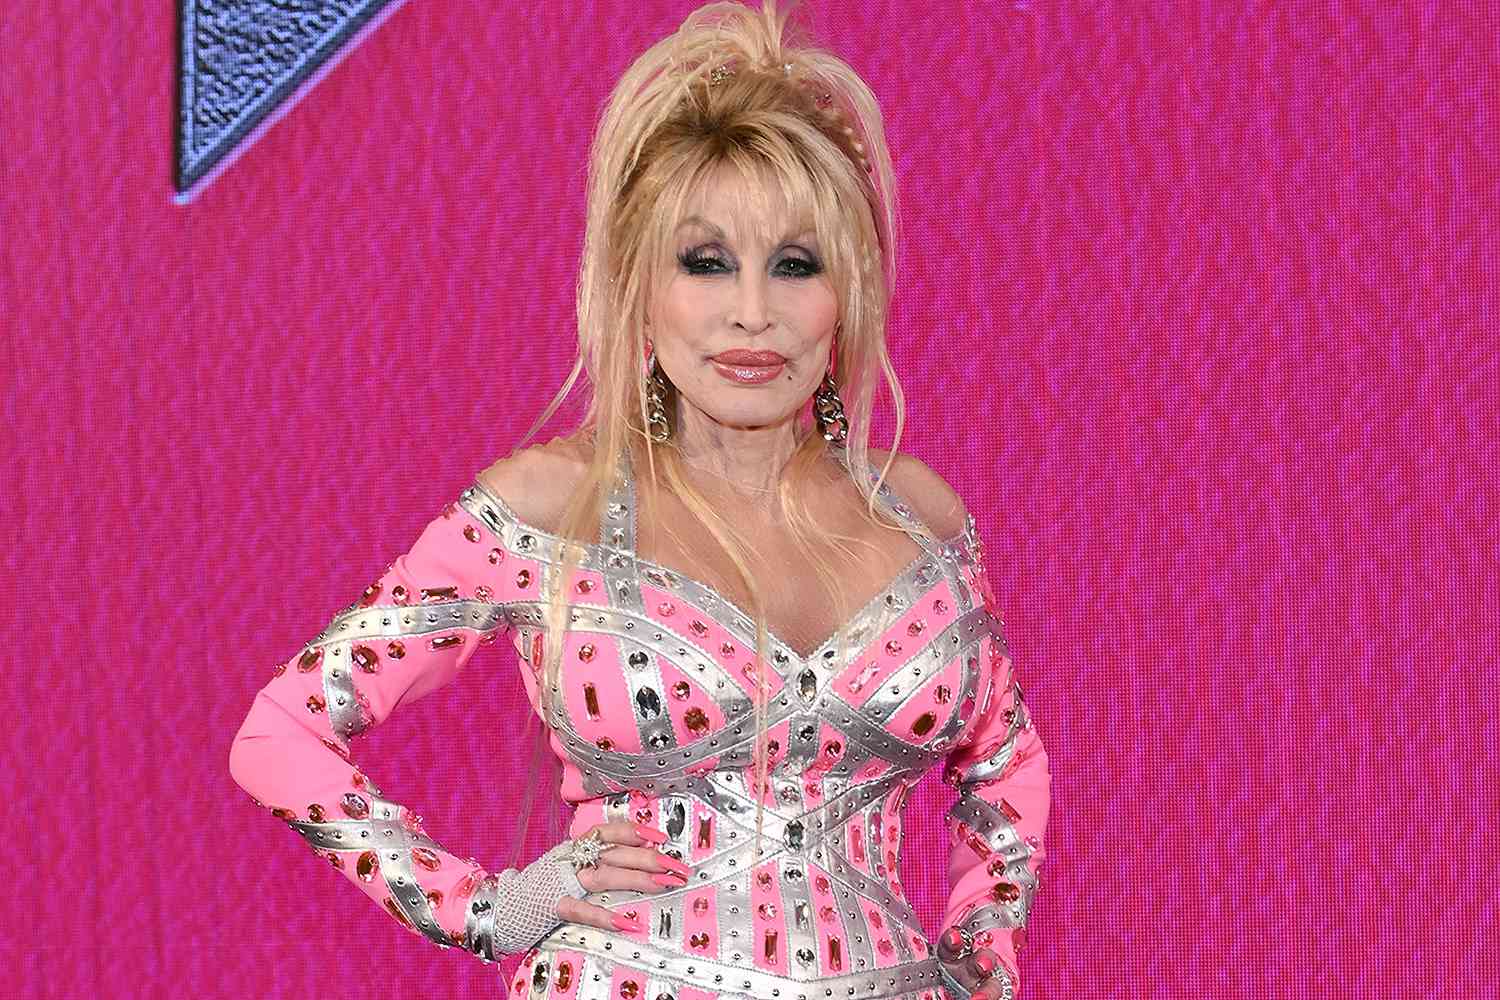 Dolly Parton Biography: Husband, Age, Songs, Net Worth, Children, Siblings, Movies